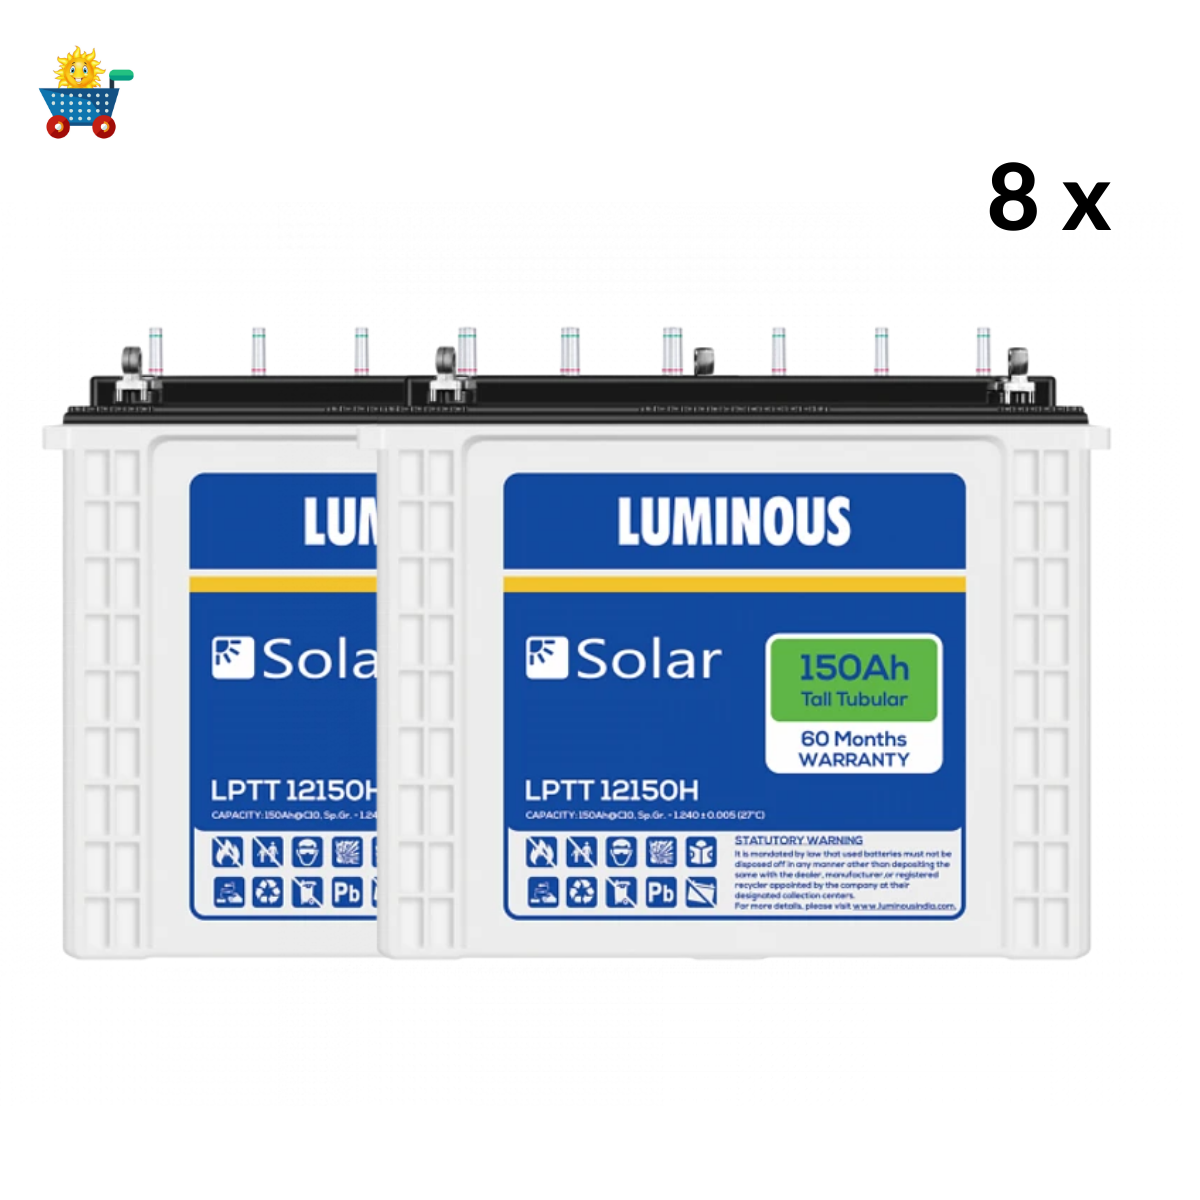 Luminous 6 kw solar off grid system with 7.5 kVA MPPT off grid inverter and solar battery 200ah at best price for home- Apollo Universe